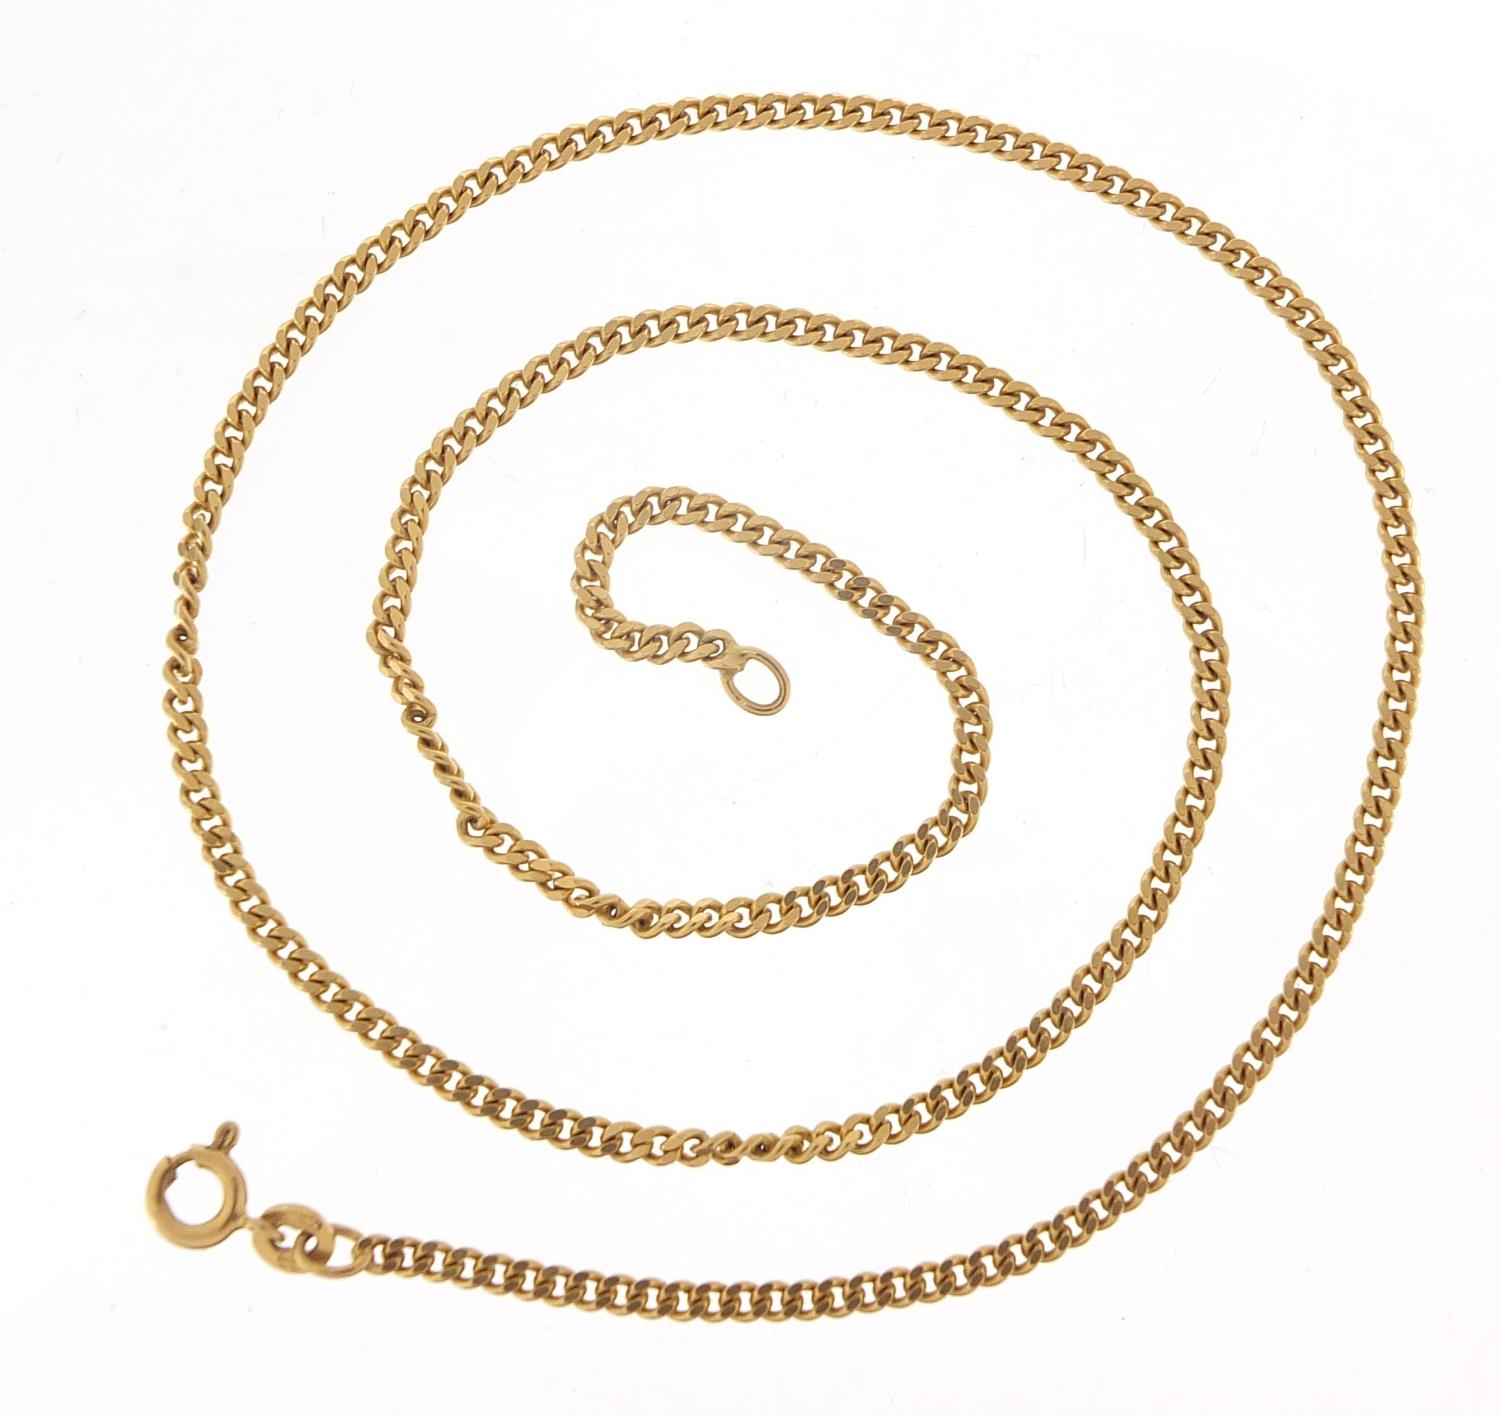 9ct gold curb link necklace, 46cm in length, 7.9g : For Further Condition Reports Please Visit Our - Image 2 of 3